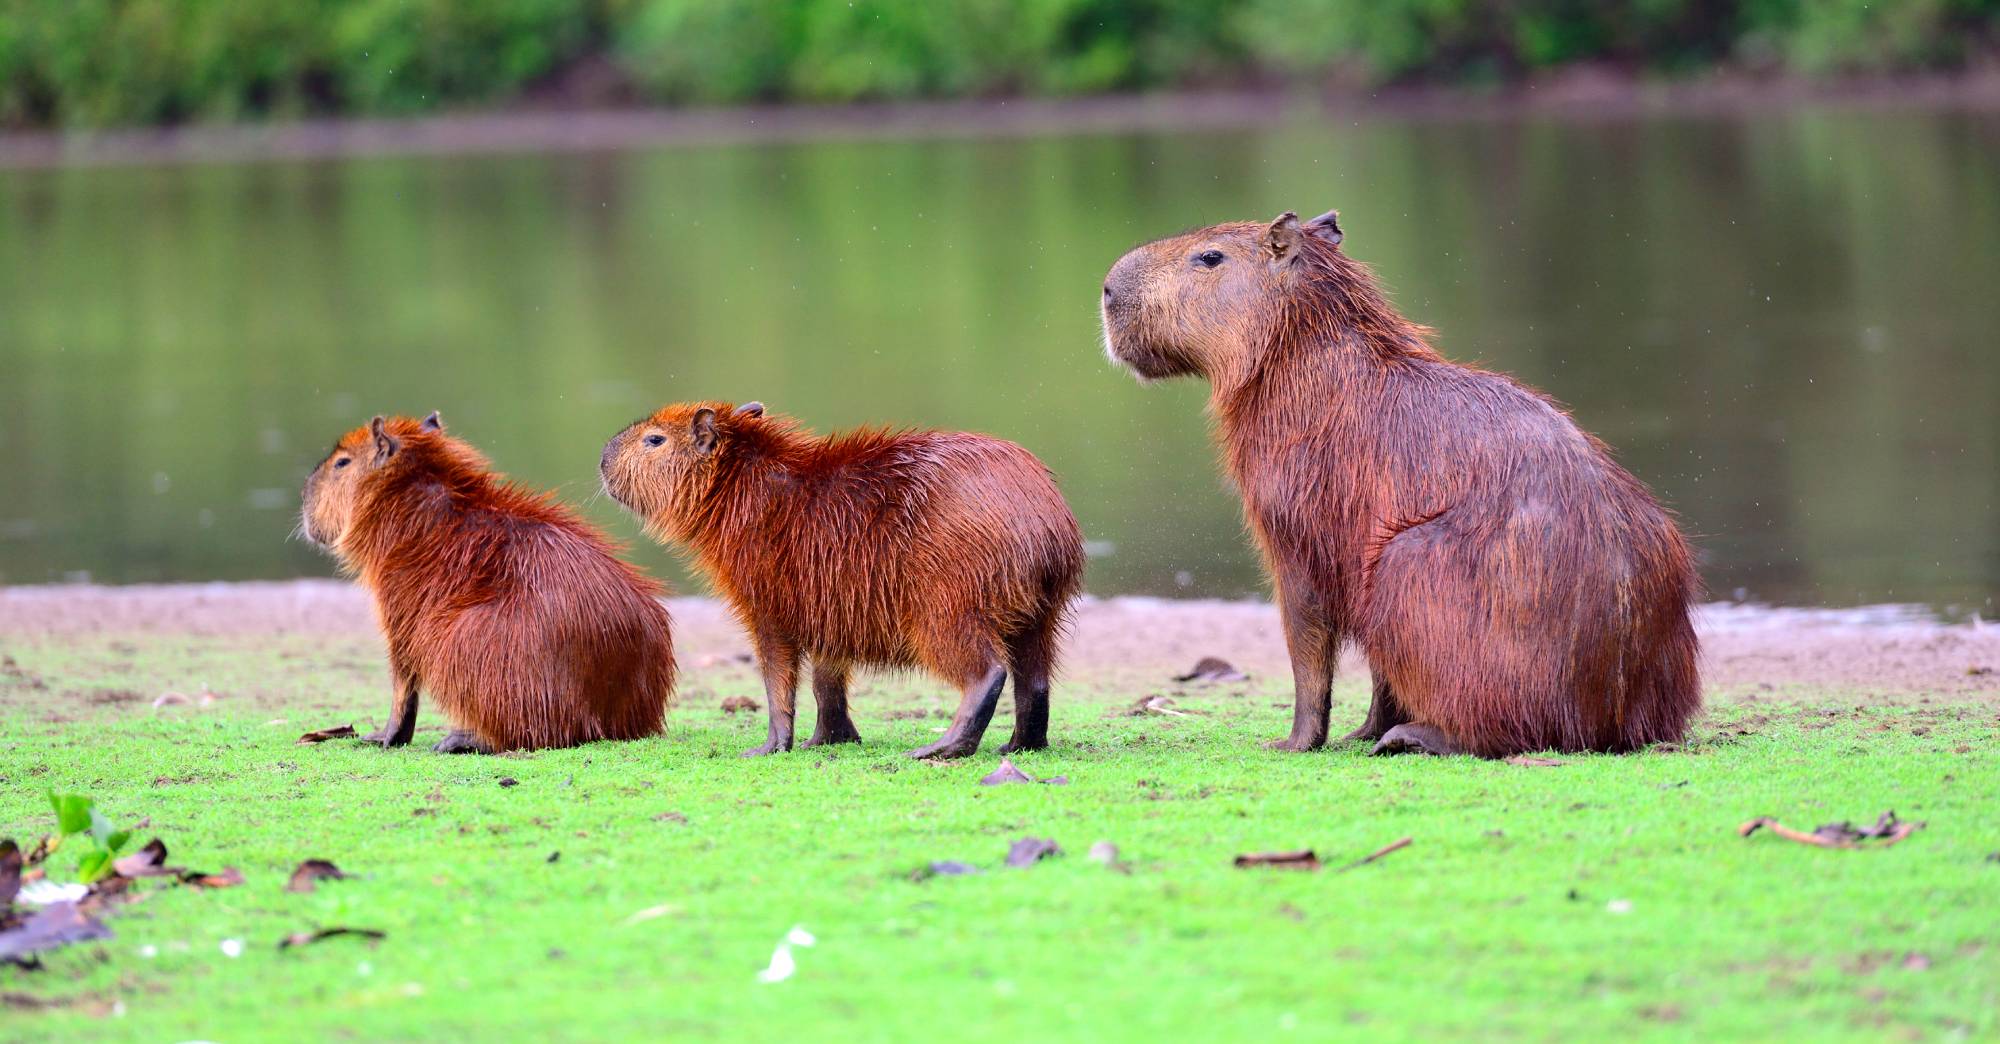 The capybara is the largest rodent in the world, in Pantanal, Mato Grosso, Brazil. Image credit: © Ckchiu | Dreamstime